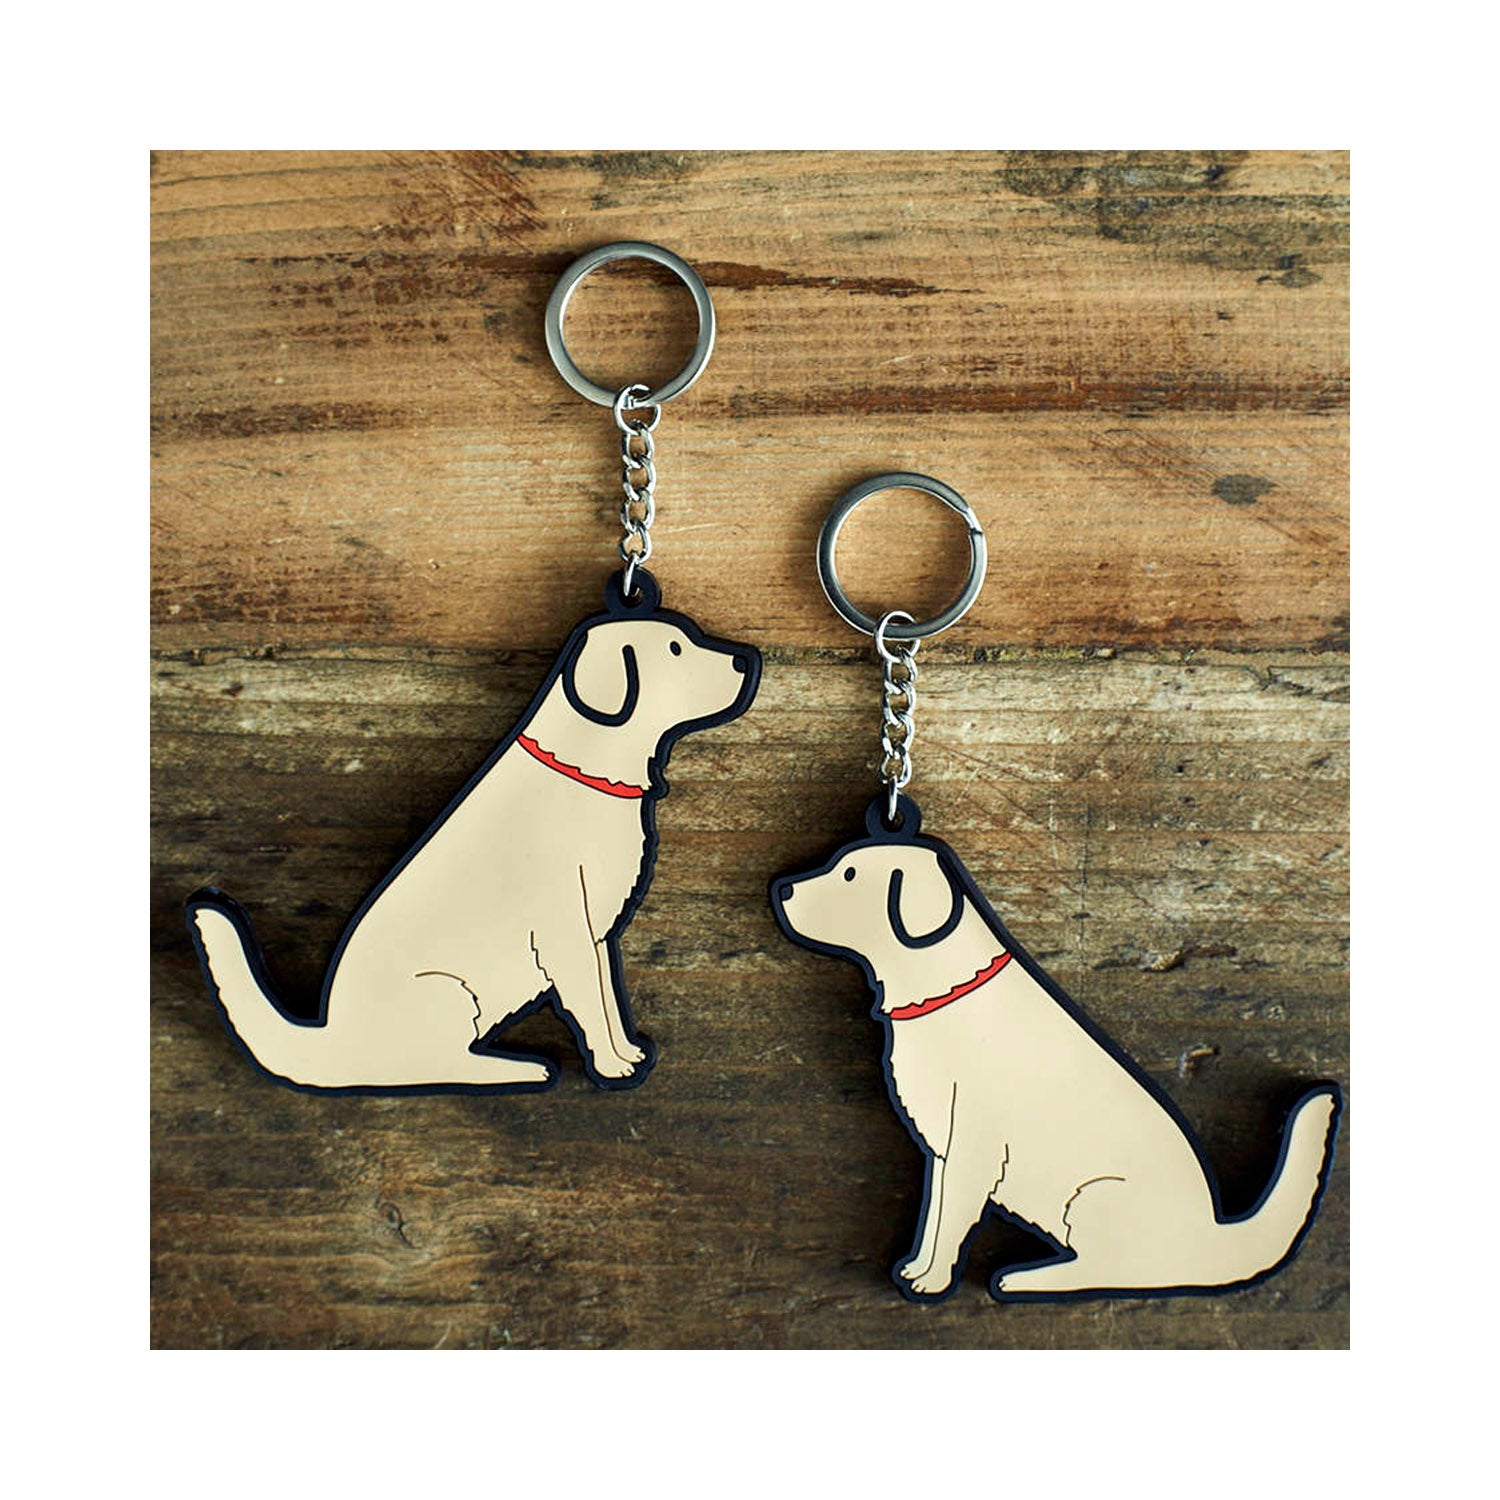 Dog Lover Gifts available at Dog Krazy Gifts - Noah The Golden Retriever Keyring - part of the Sweet William range available from Dog Krazy Gifts